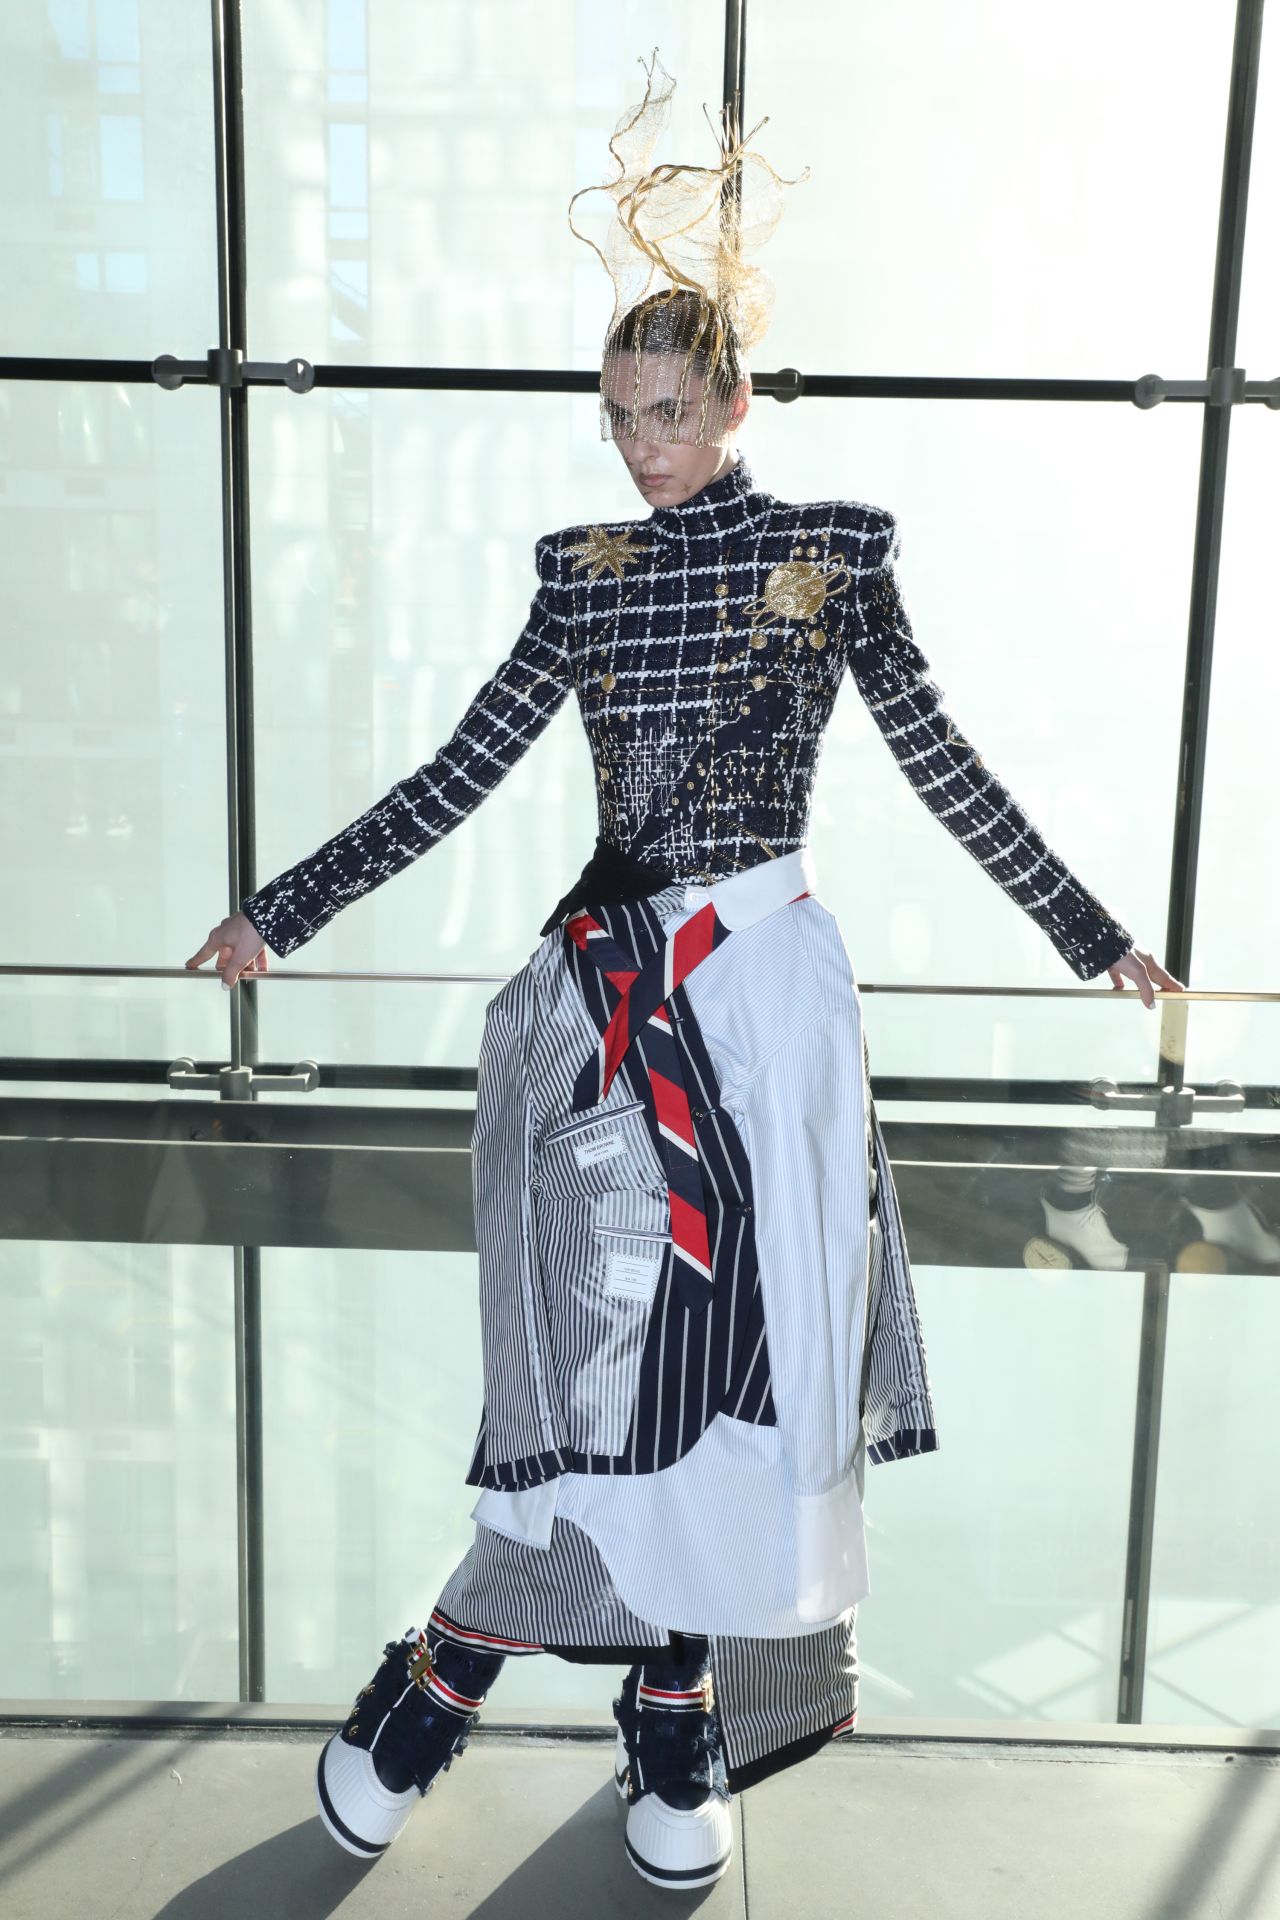 Accessories at Thom Browne's half-hour stage show included delicate hand-crocheted gold wire headpieces, clock handbags and shoes, and platform astronaut boots.